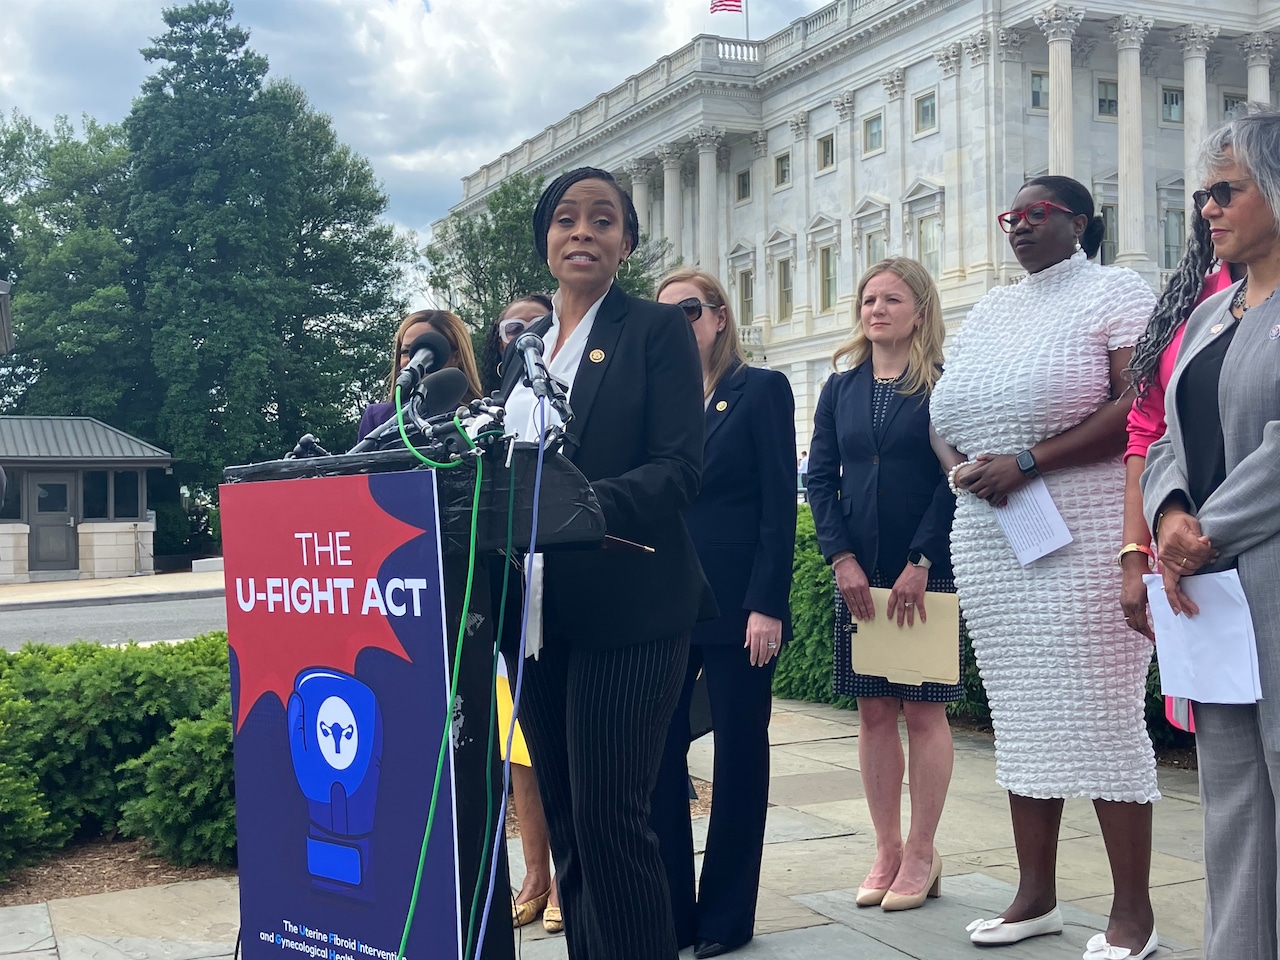 Fighting fibroids: U.S. Rep. Shontel Brown kicks off crusade with personal tale [Video]